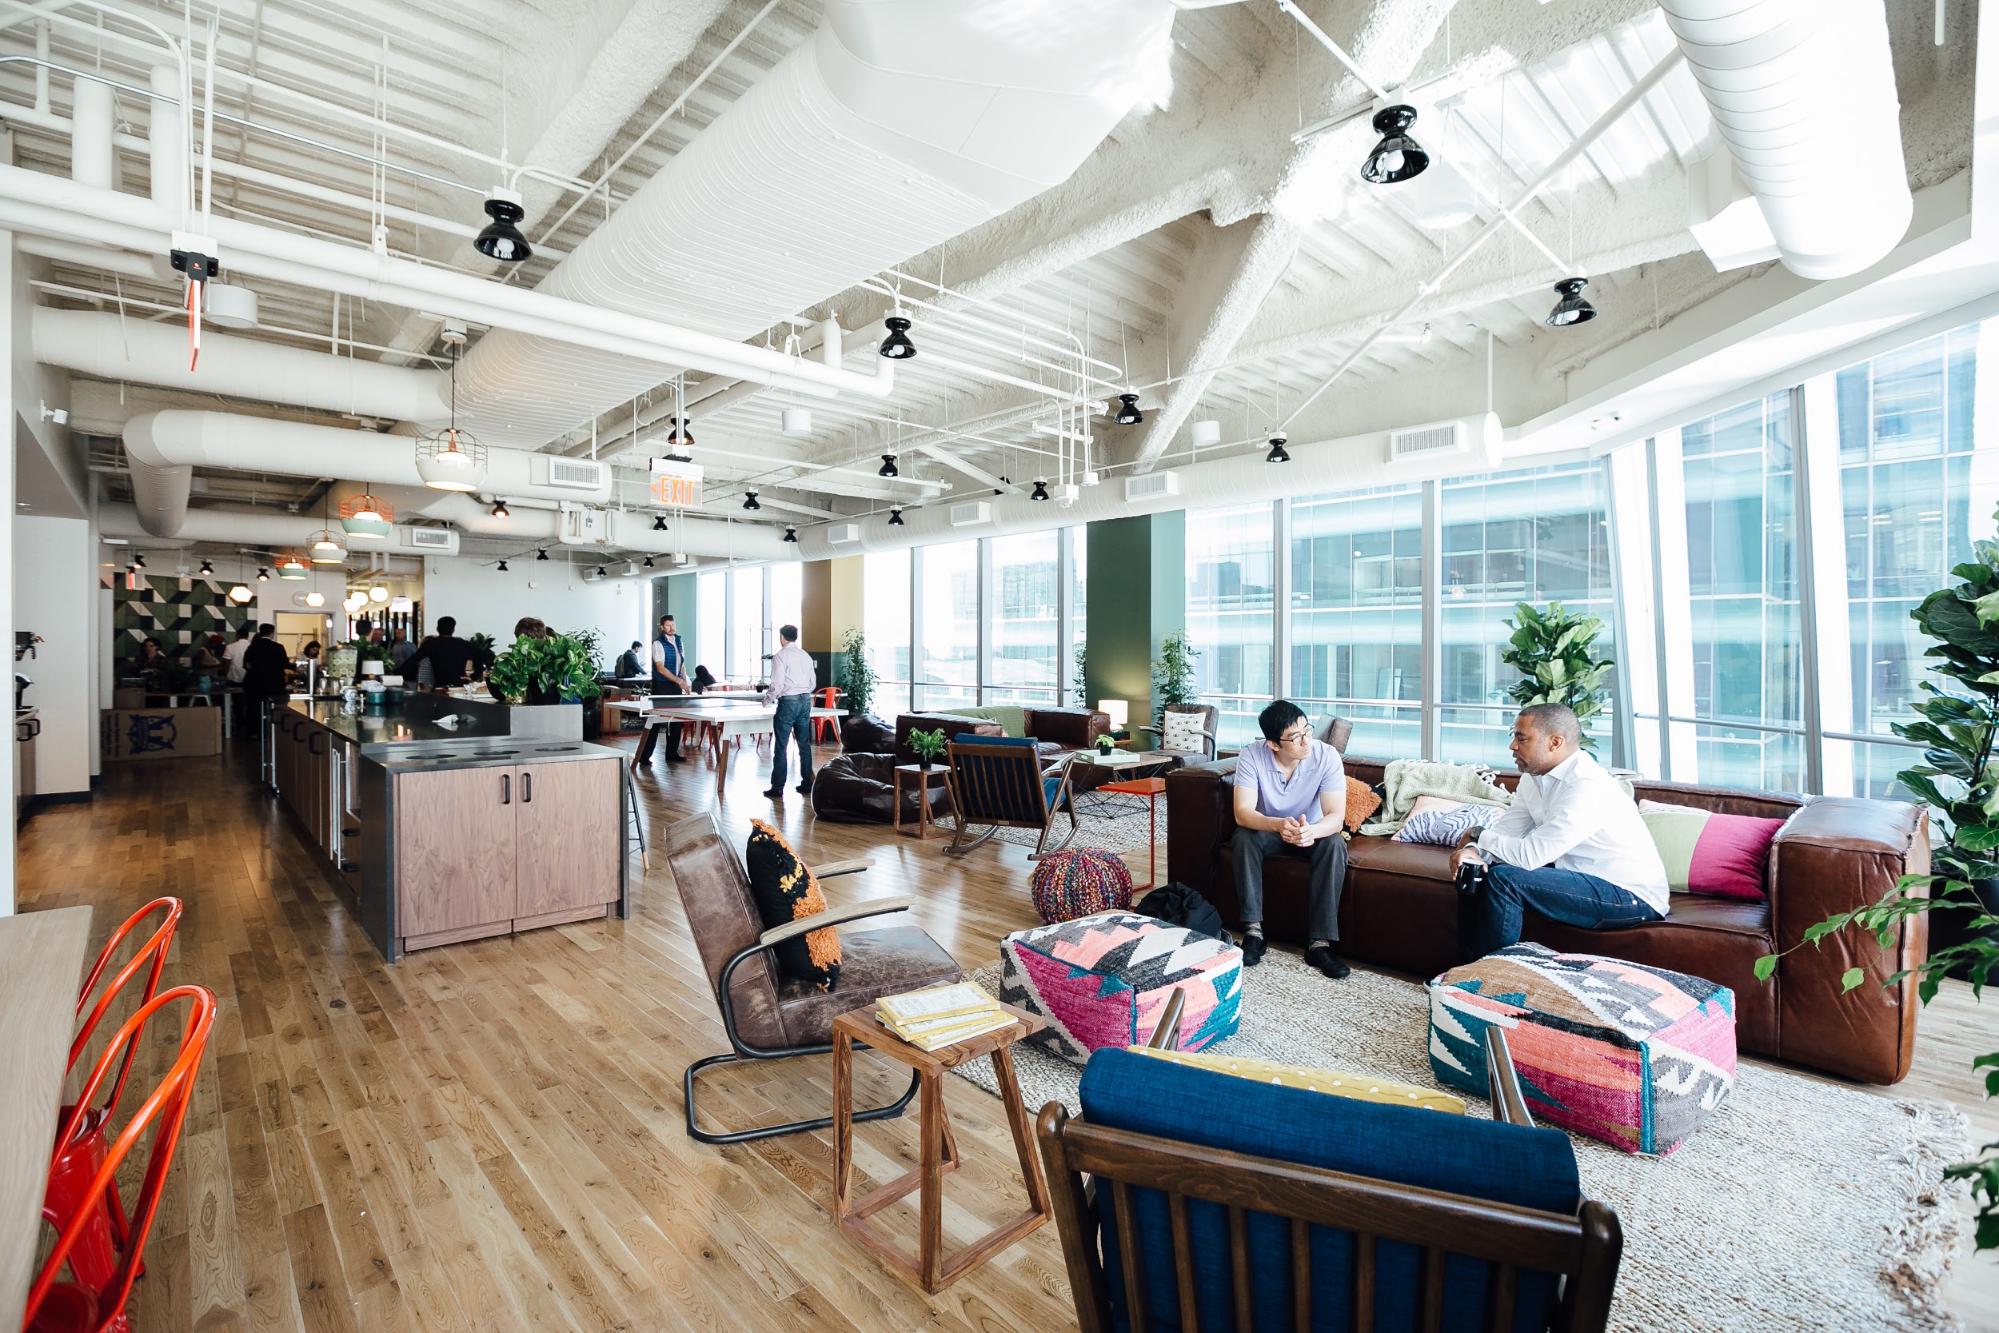 A common area in the WeWork in Times Square, New York City